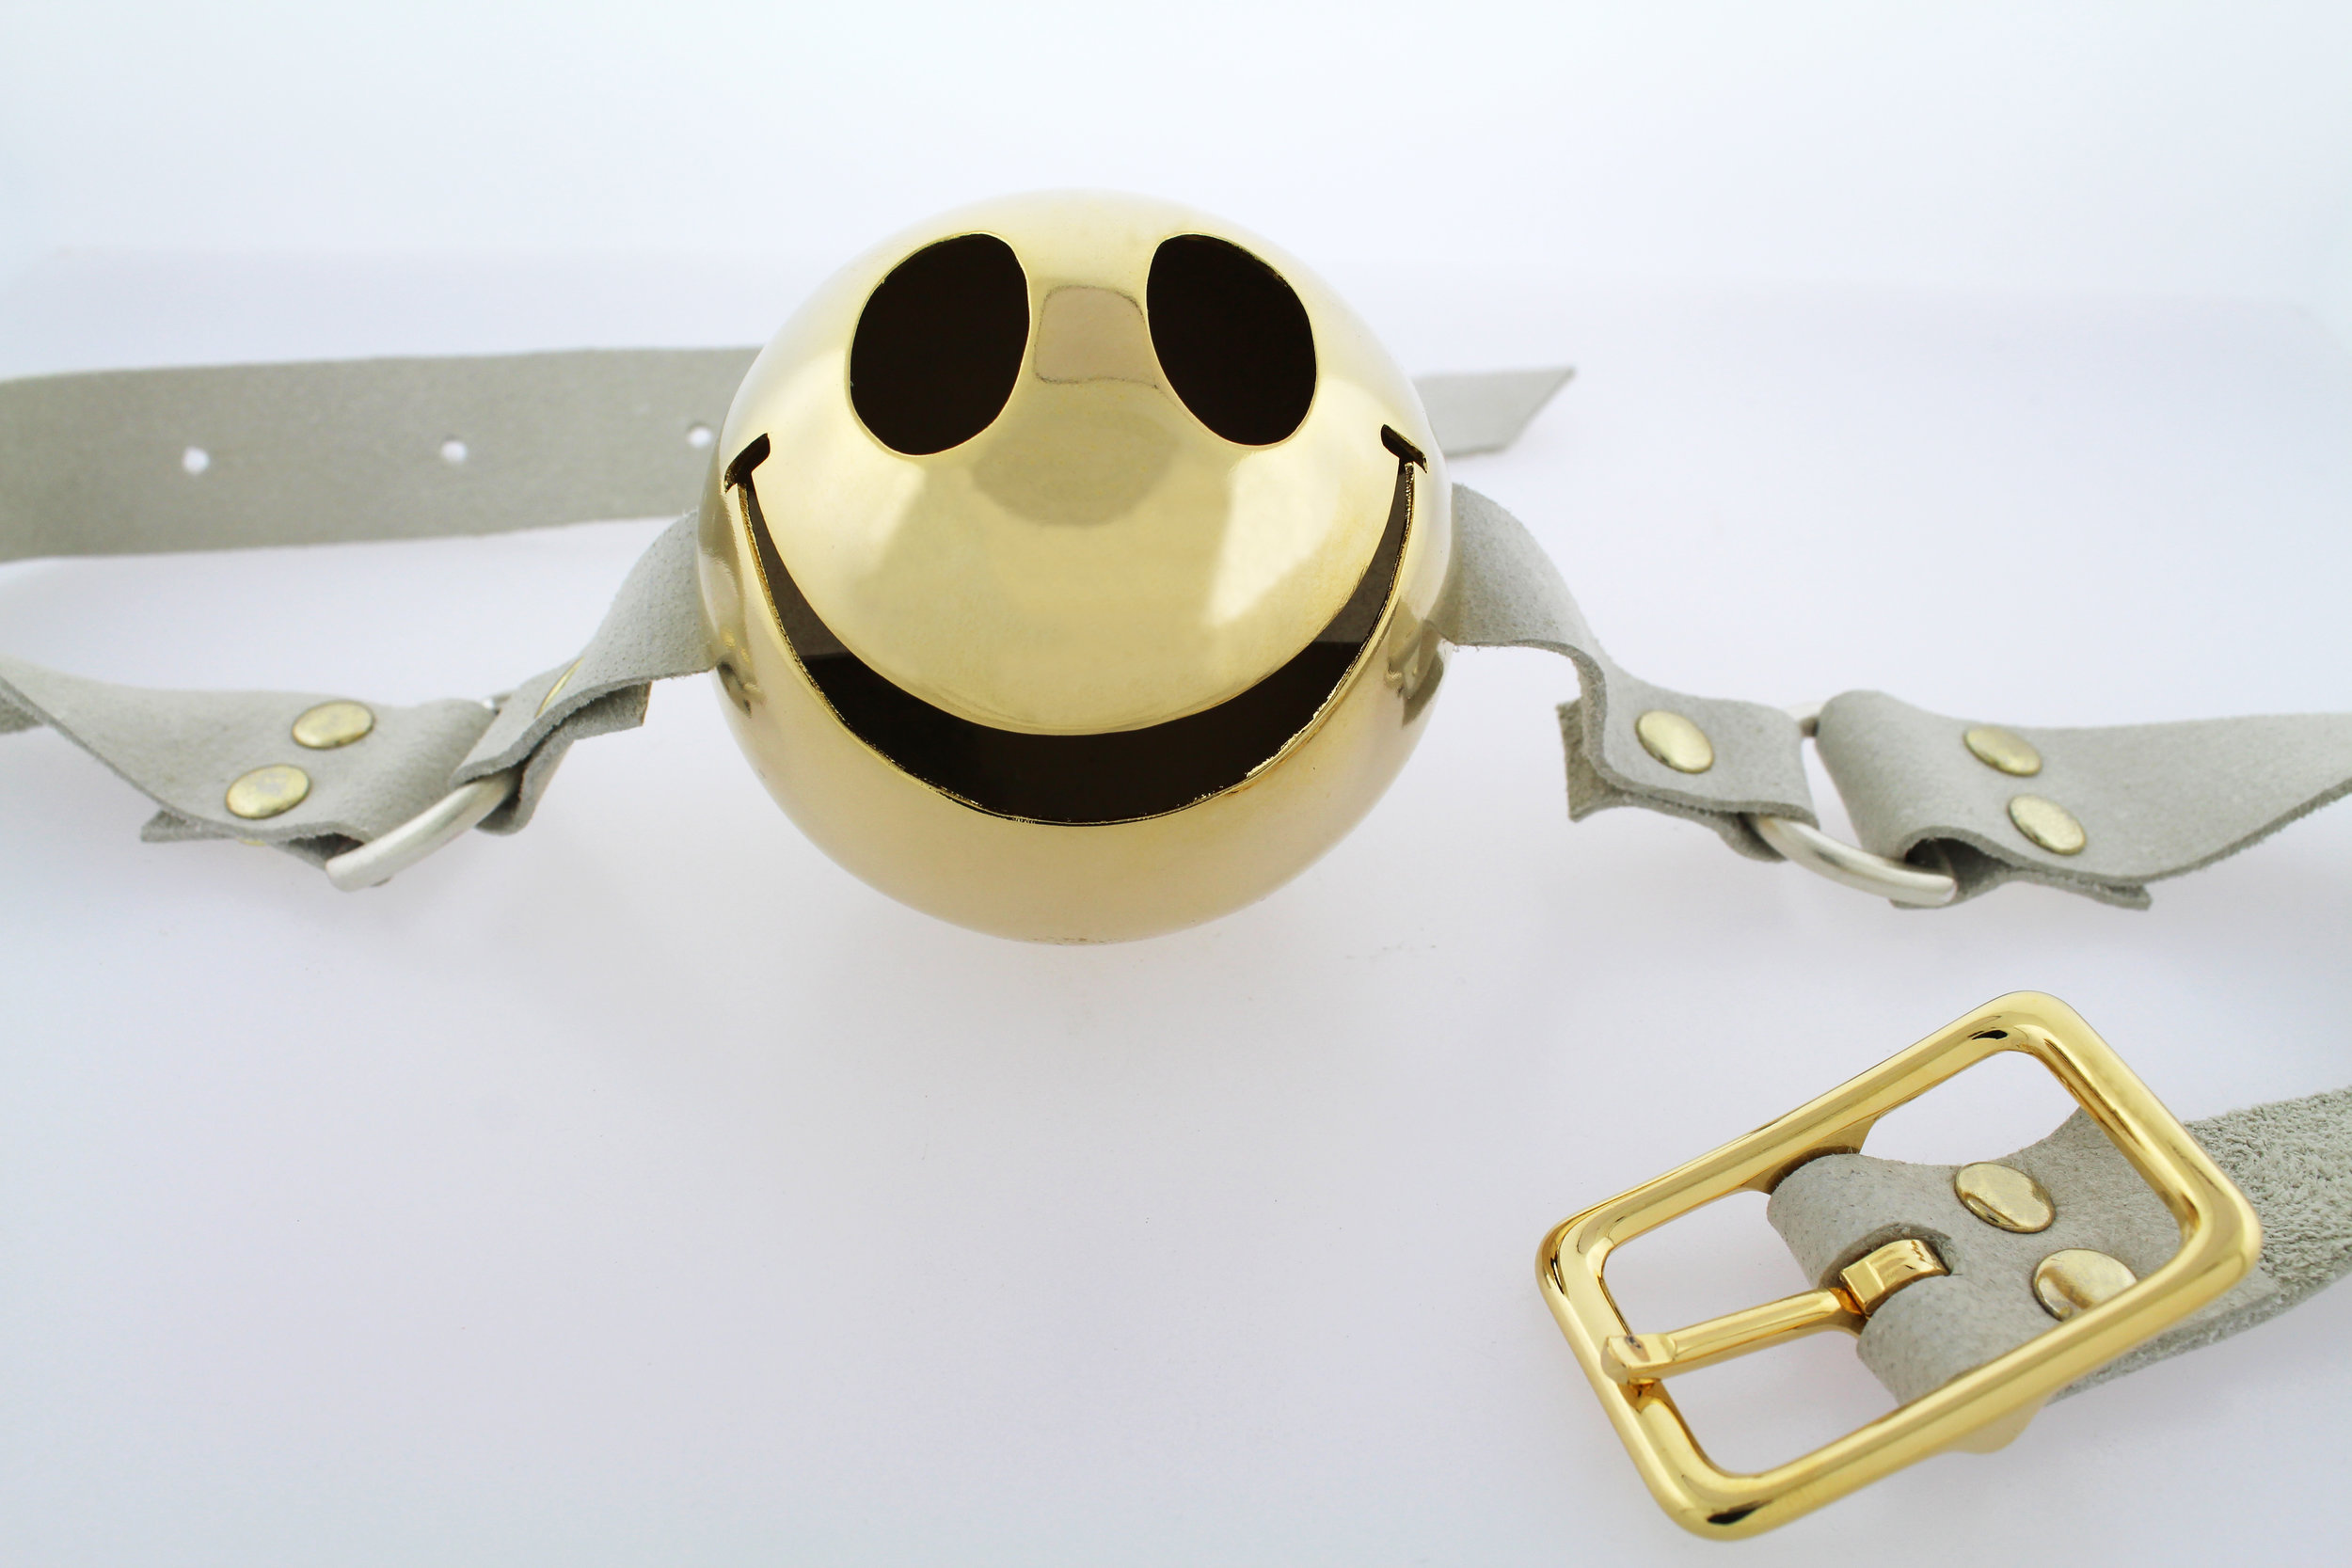   Smiley Gag   Gold-Plated Copper, Silver, Steel, Leather  18”x2.5”x2.5”  December 2012   